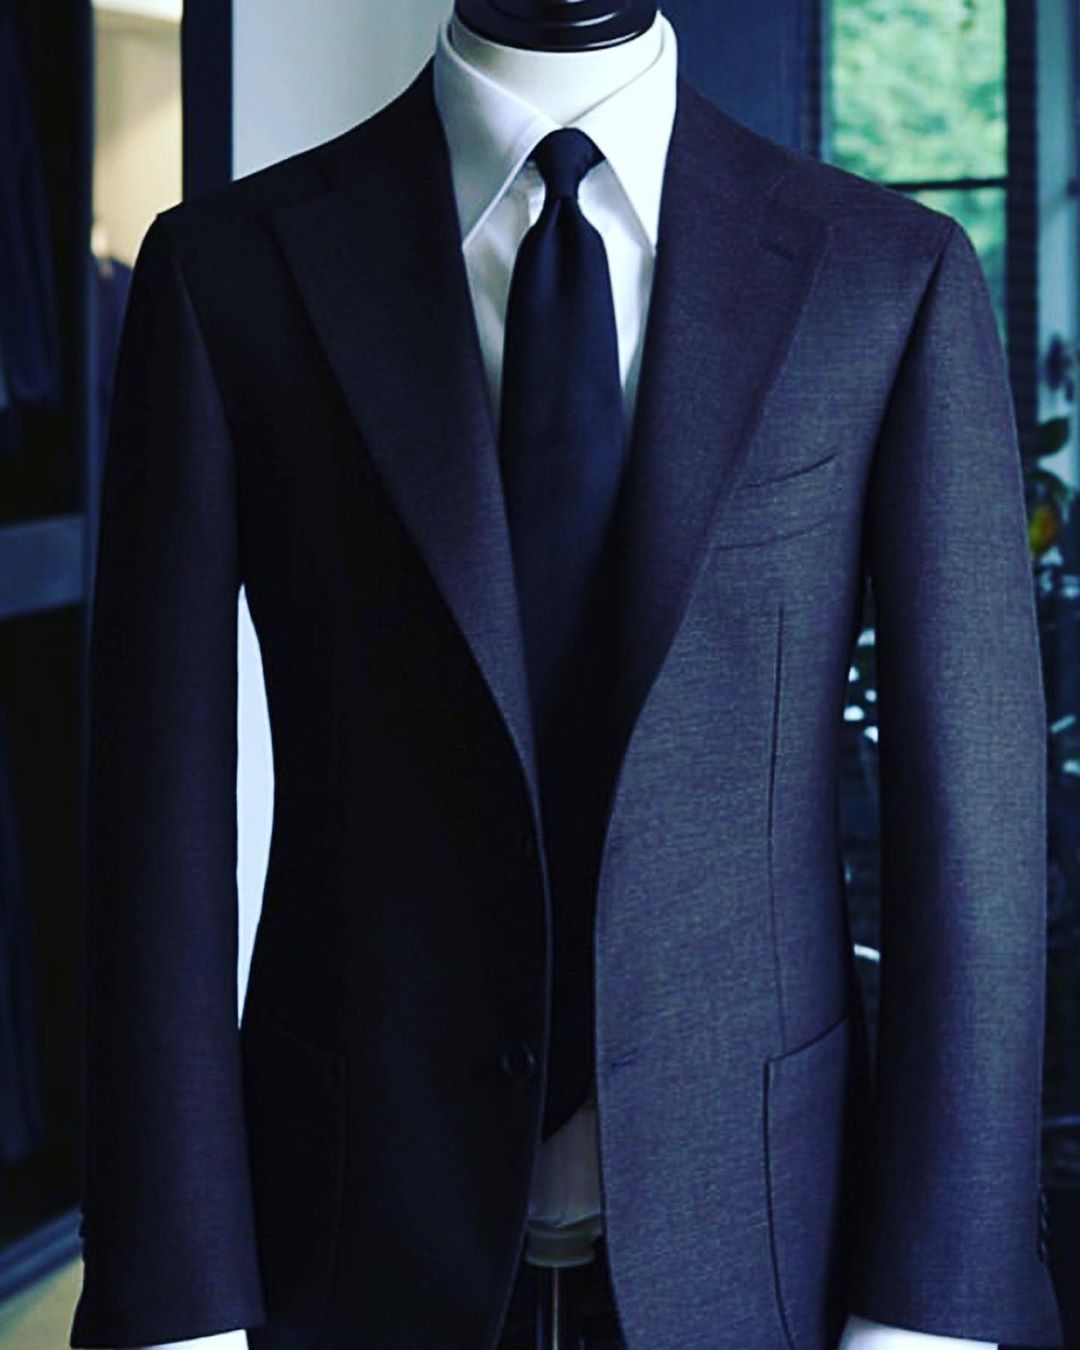 Make the best style by wearing bespoke suits